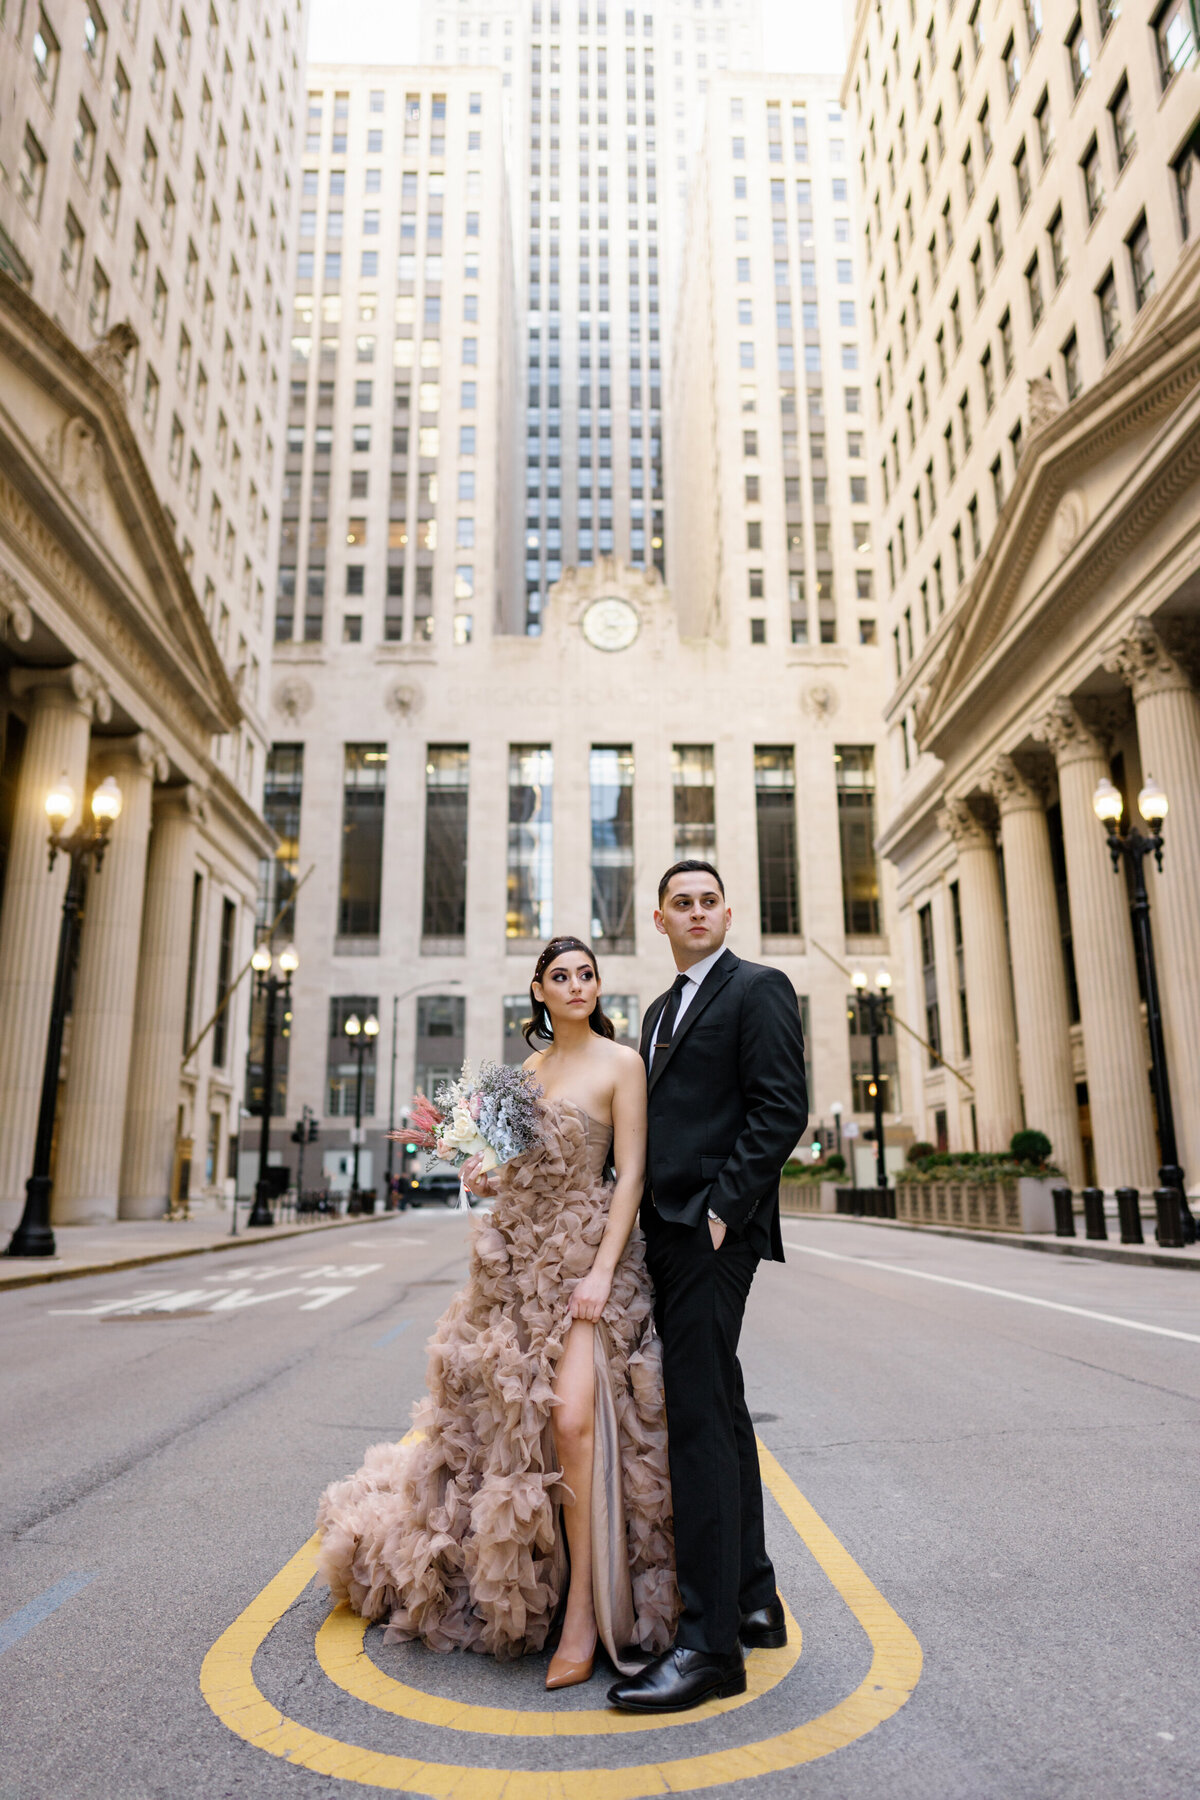 Aspen-Avenue-Chicago-Wedding-Photographer-Rookery-Engagement-Session-Histoircal-Stairs-Moody-Dramatic-Magazine-Unique-Gown-Stemming-From-Love-Emily-Rae-Bridal-Hair-FAV-57